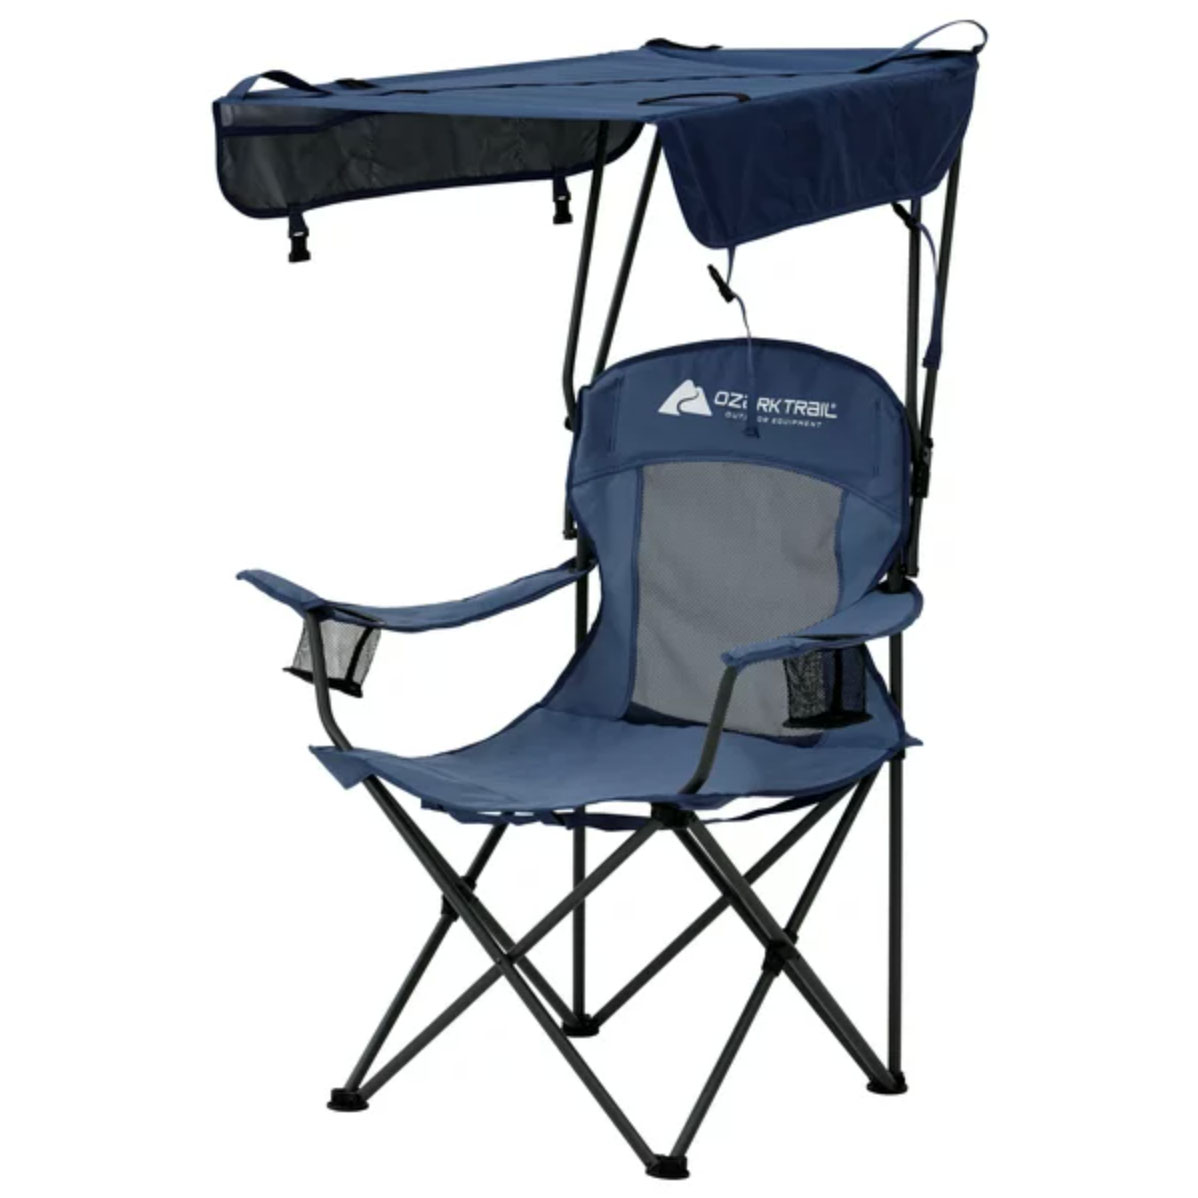 Ozark Trail Sand Island Shaded Canopy Camping Chair with Cup Holders in dark blue